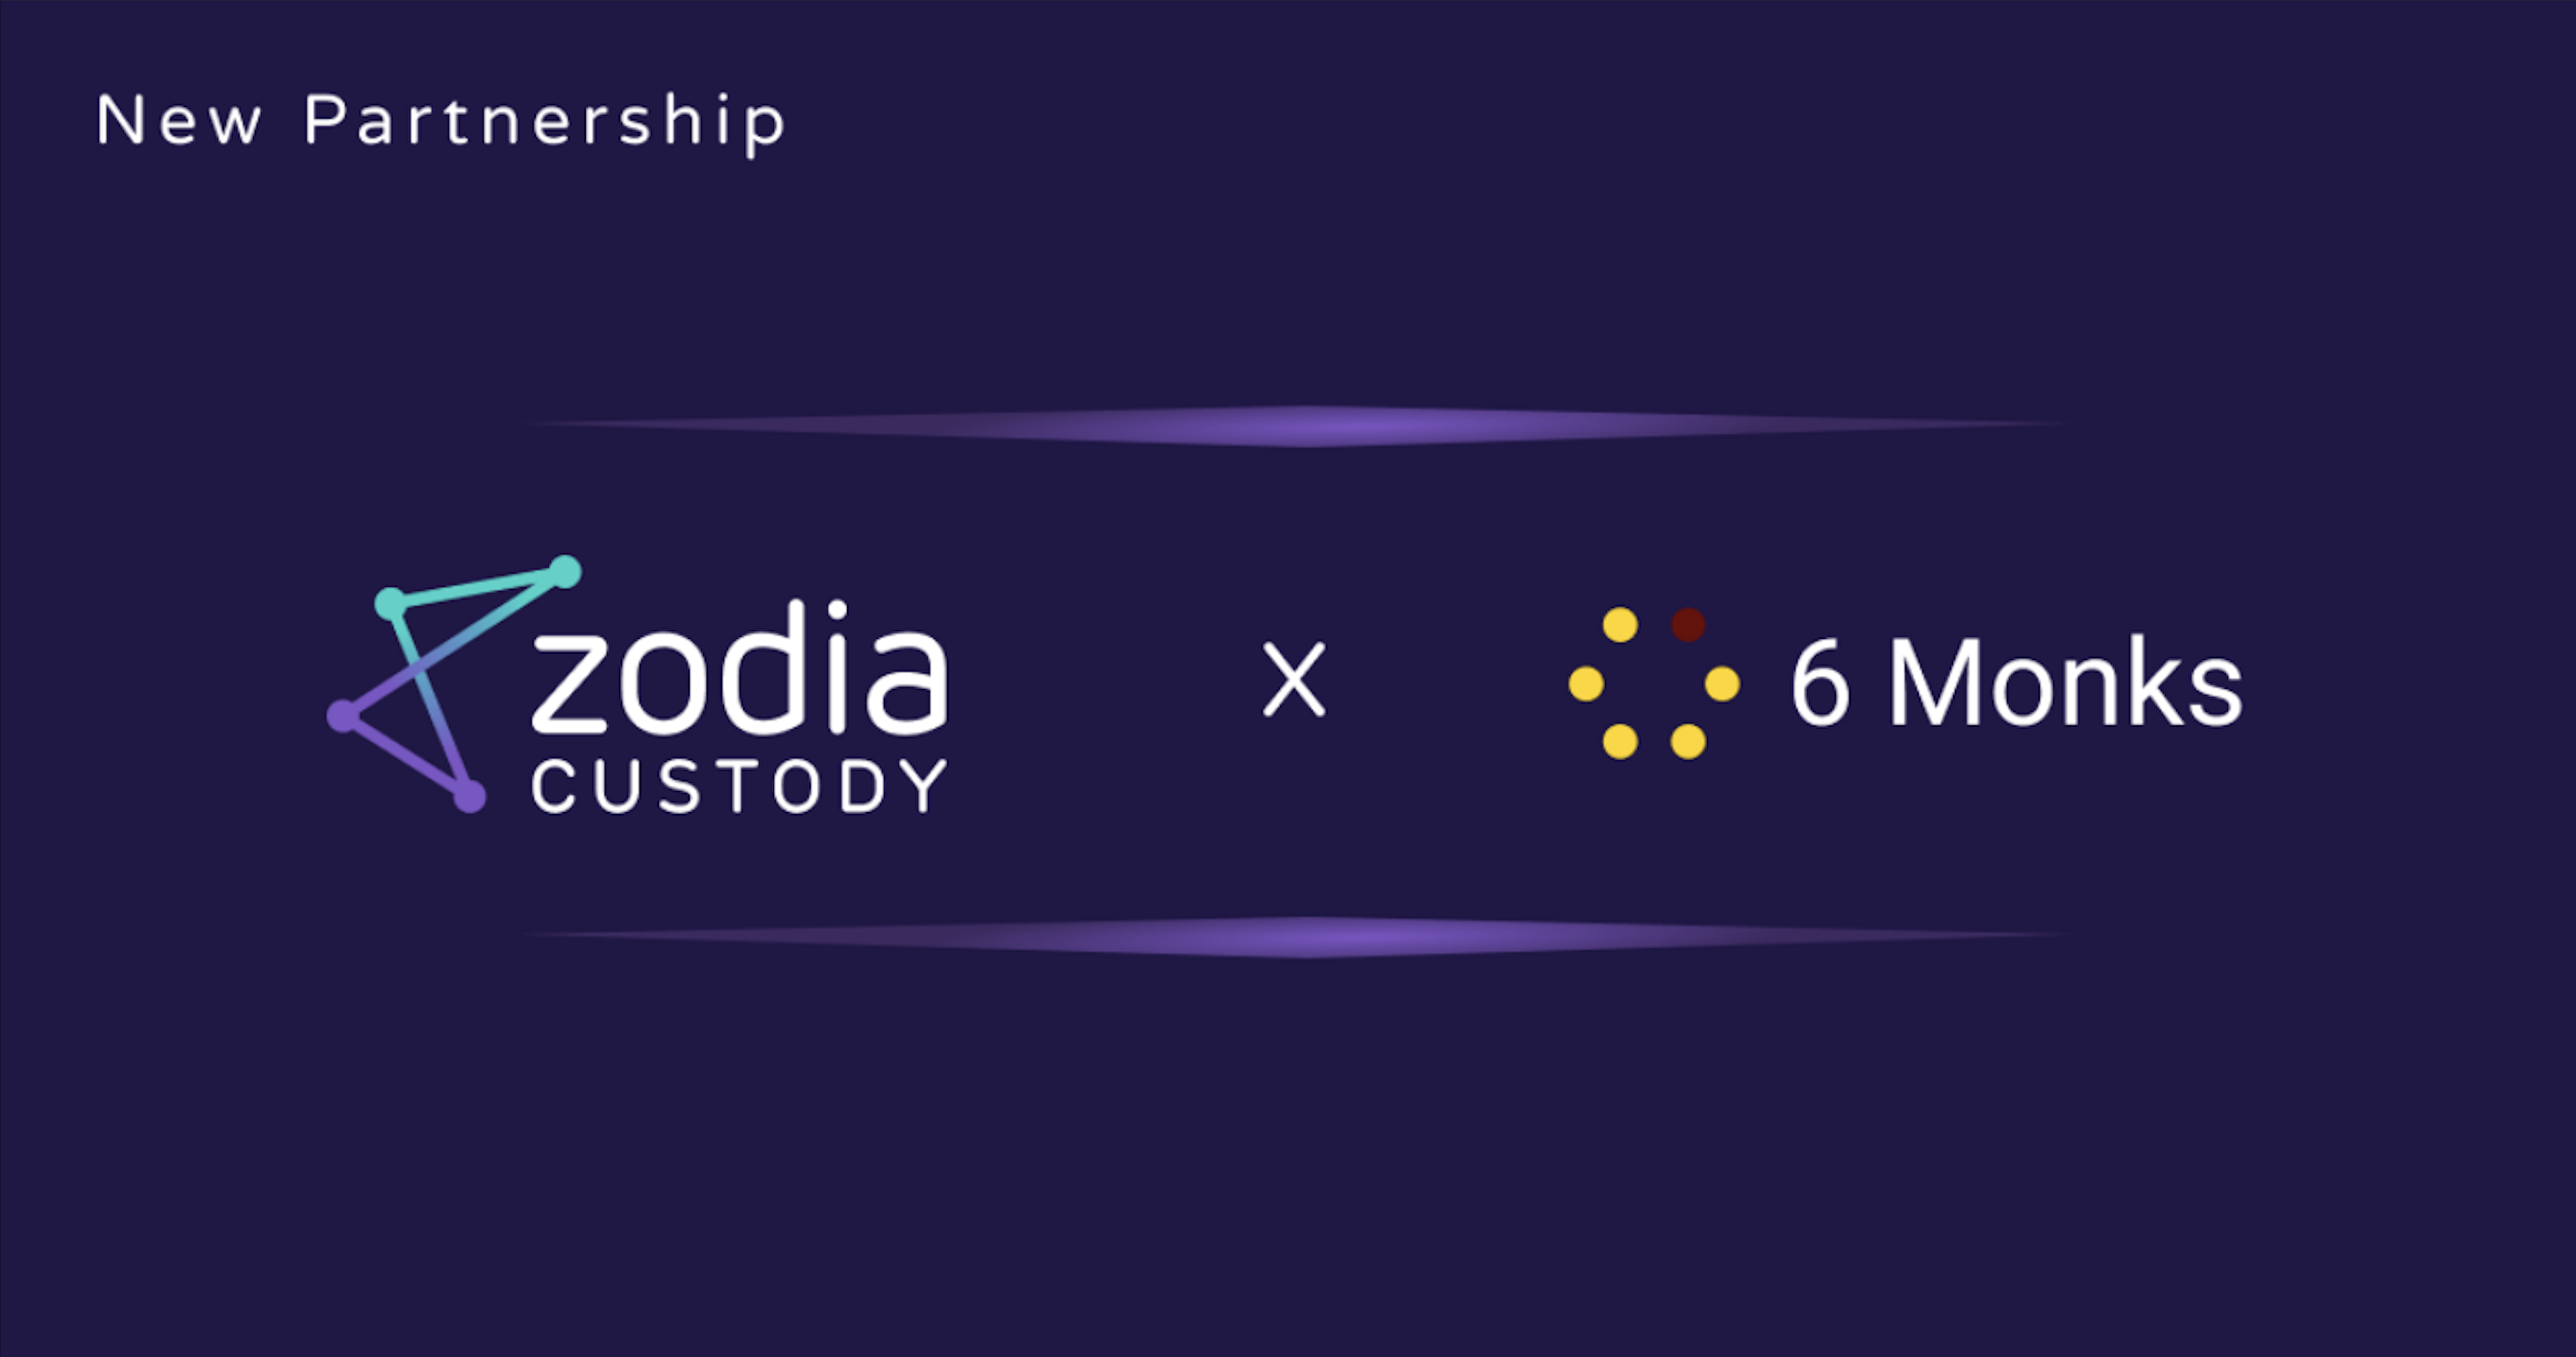 6 Monks, the ﬁrst European Alternative Investment Fund Manager approved to manage digital assets, selects Zodia Custody as custodian